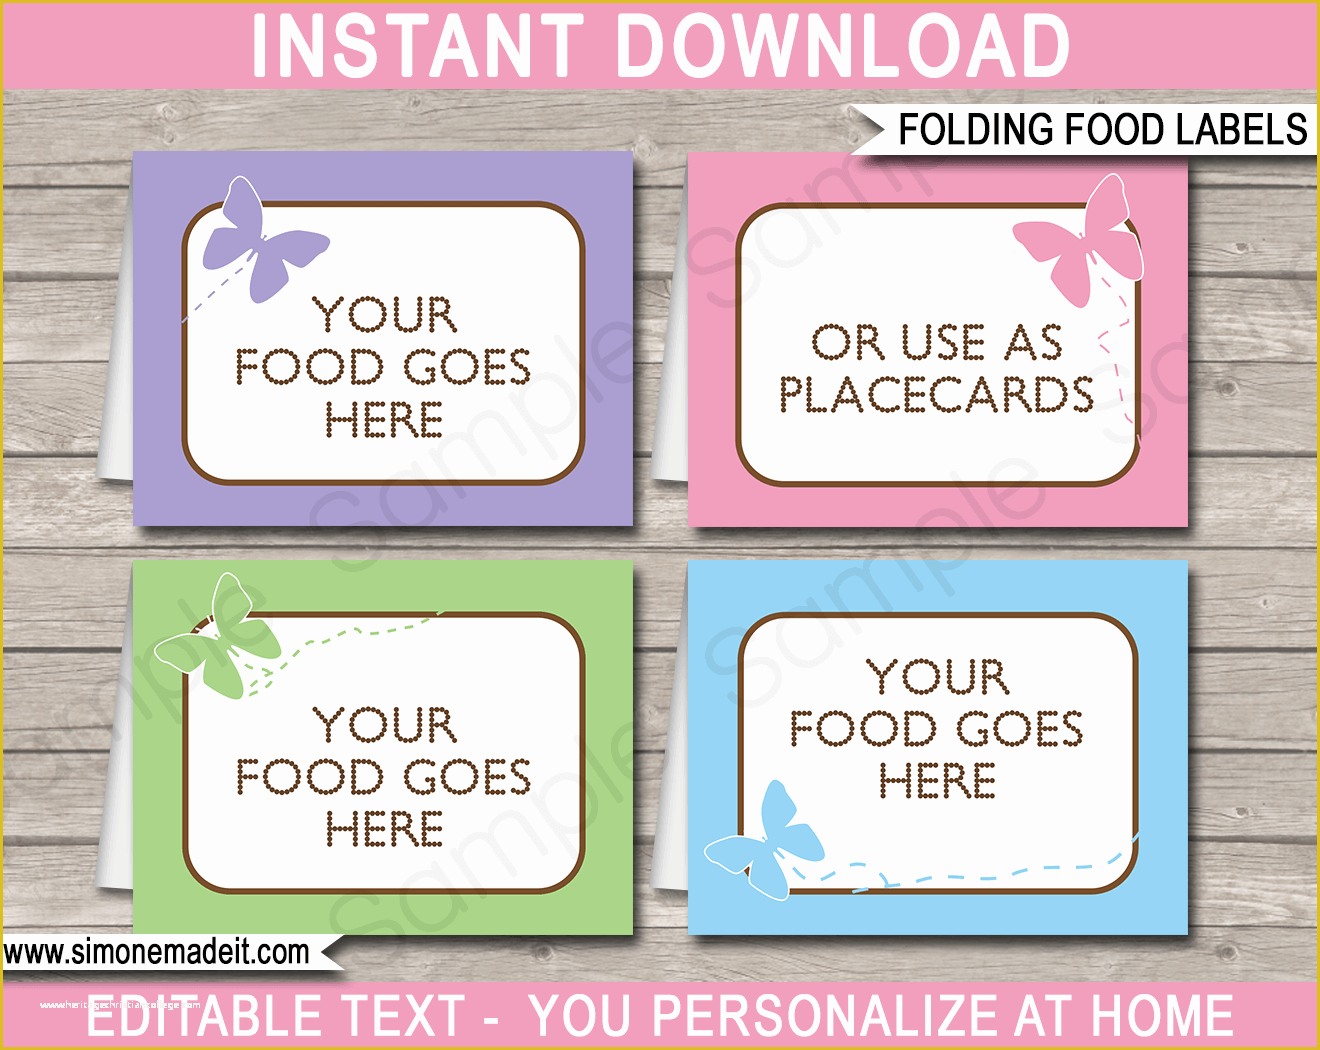 Free Printable Food Labels Templates Of Download Adobe Reader for Windows Downlaod X